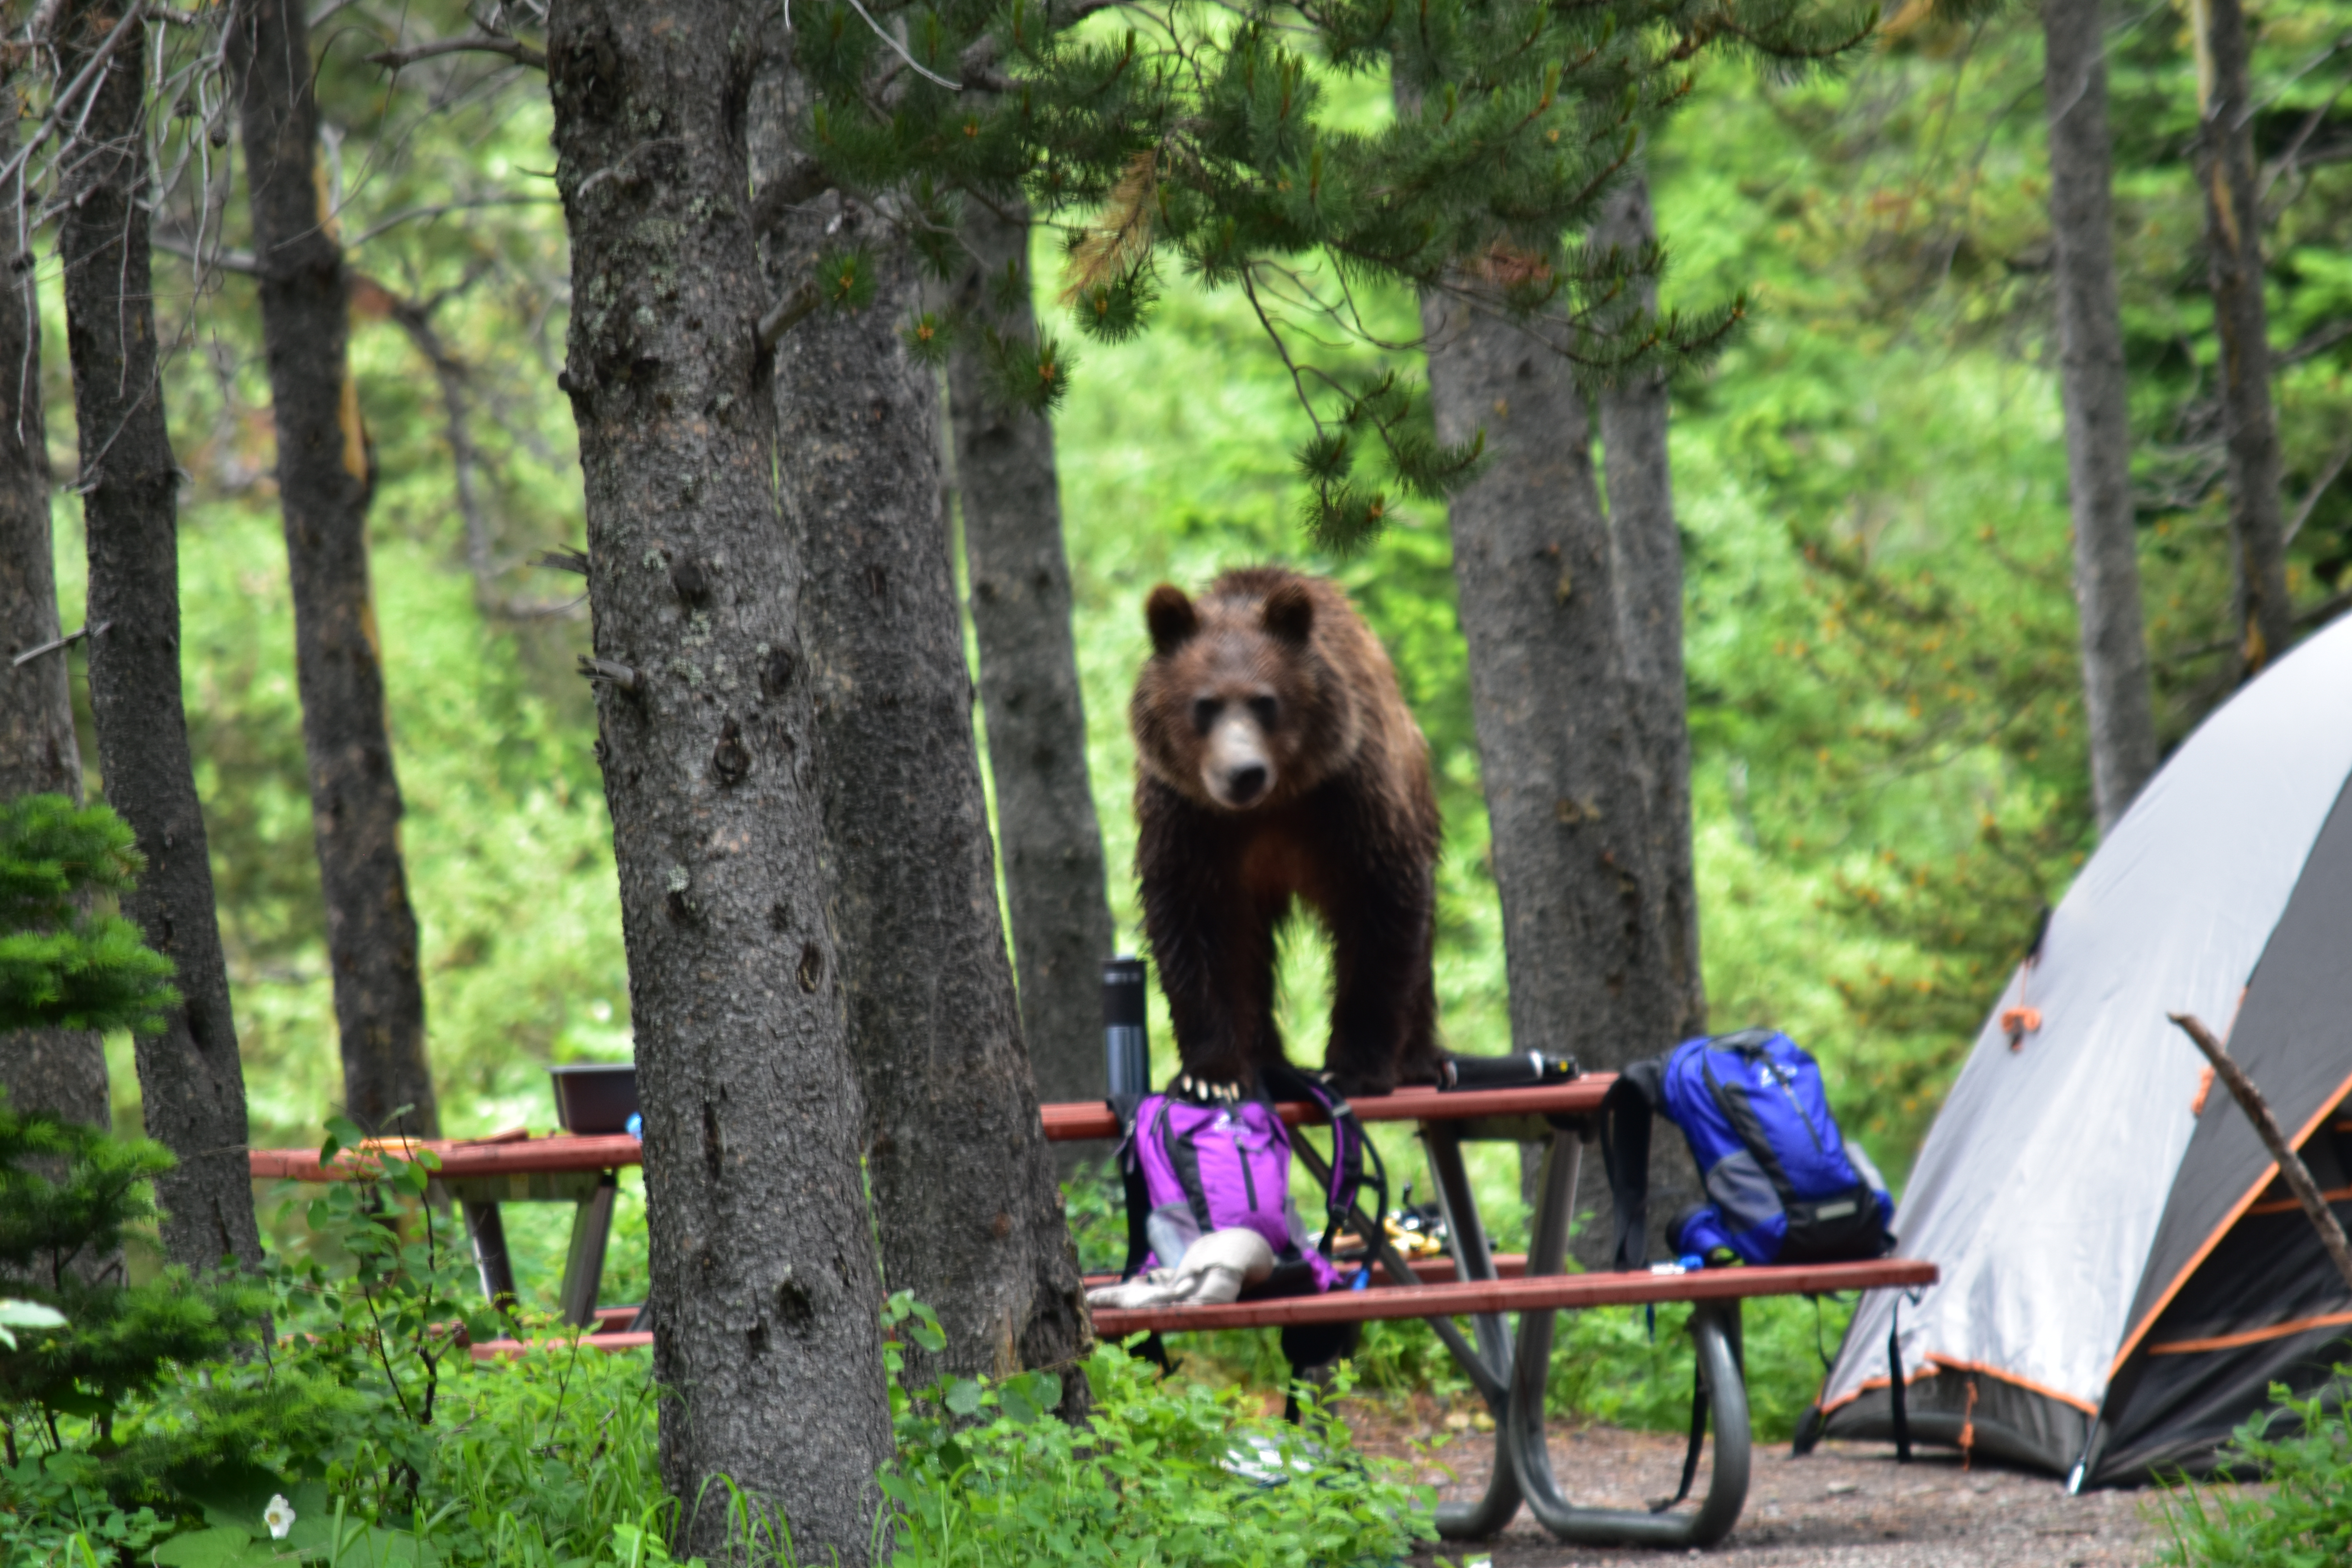 Grizzly bear in Many Glacier Campground